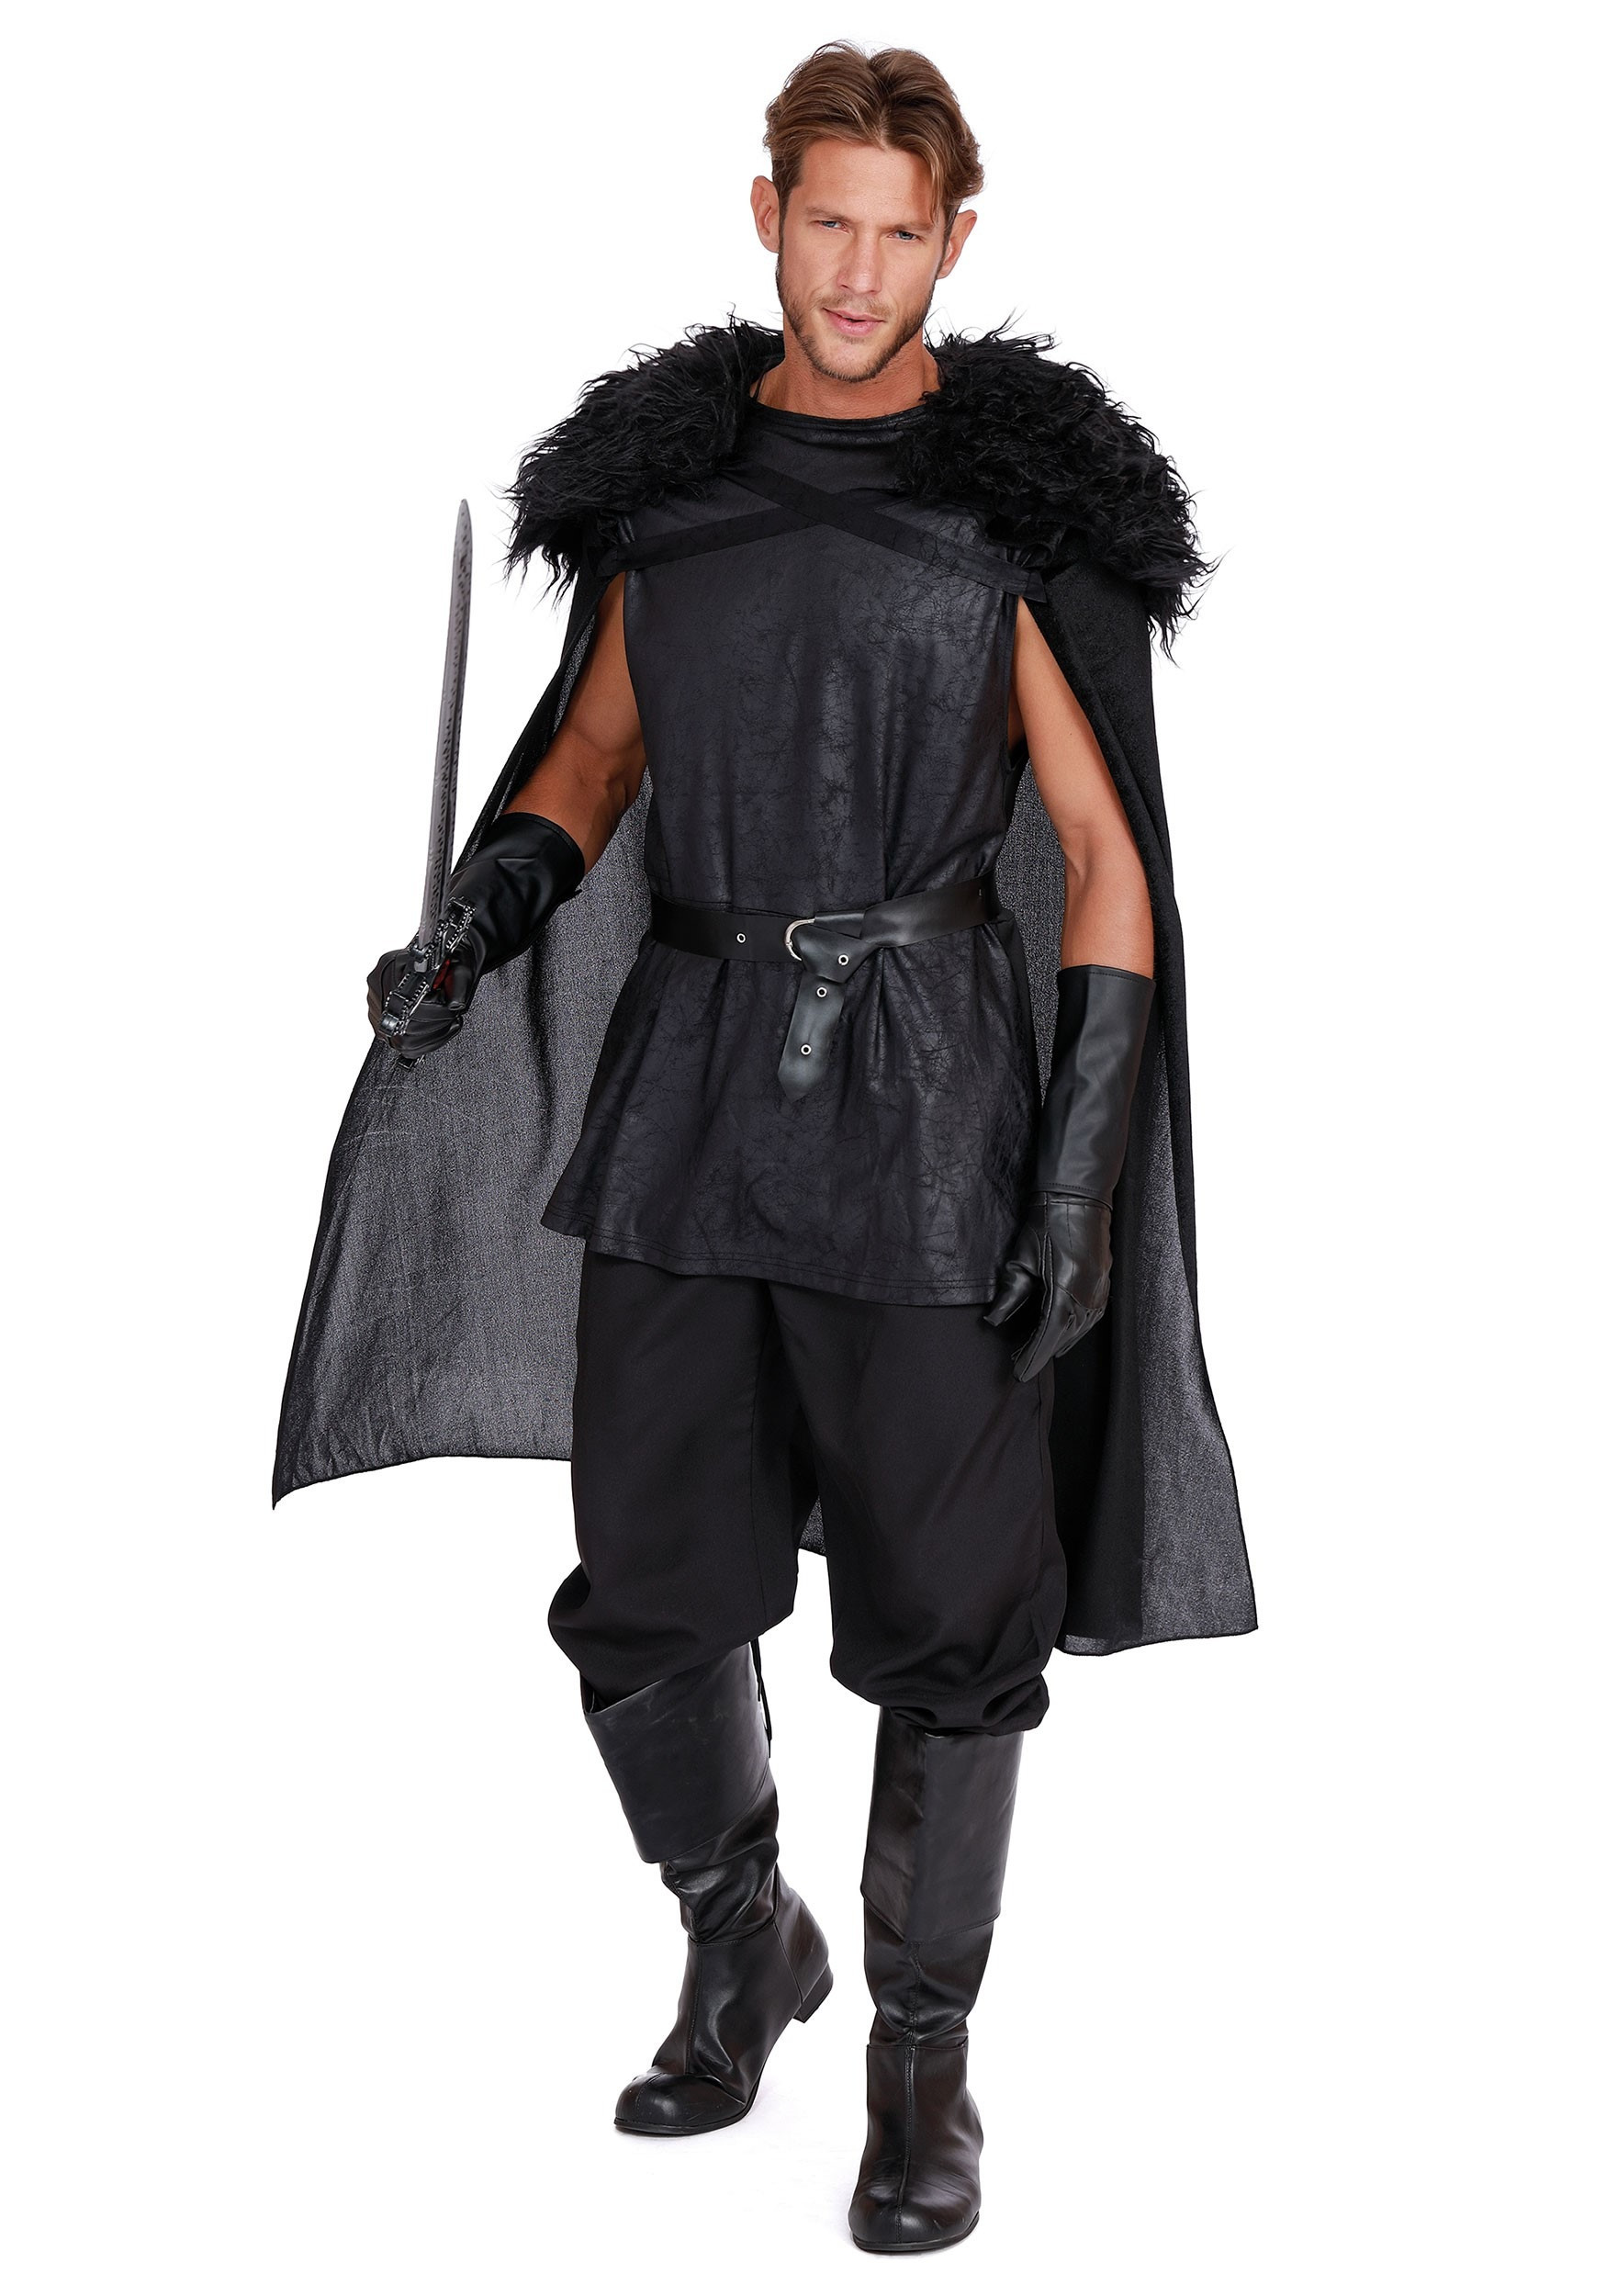 Mens Halloween Costume Ideas 2020
 100 Best Halloween Costumes 2020 For Kids & Adults